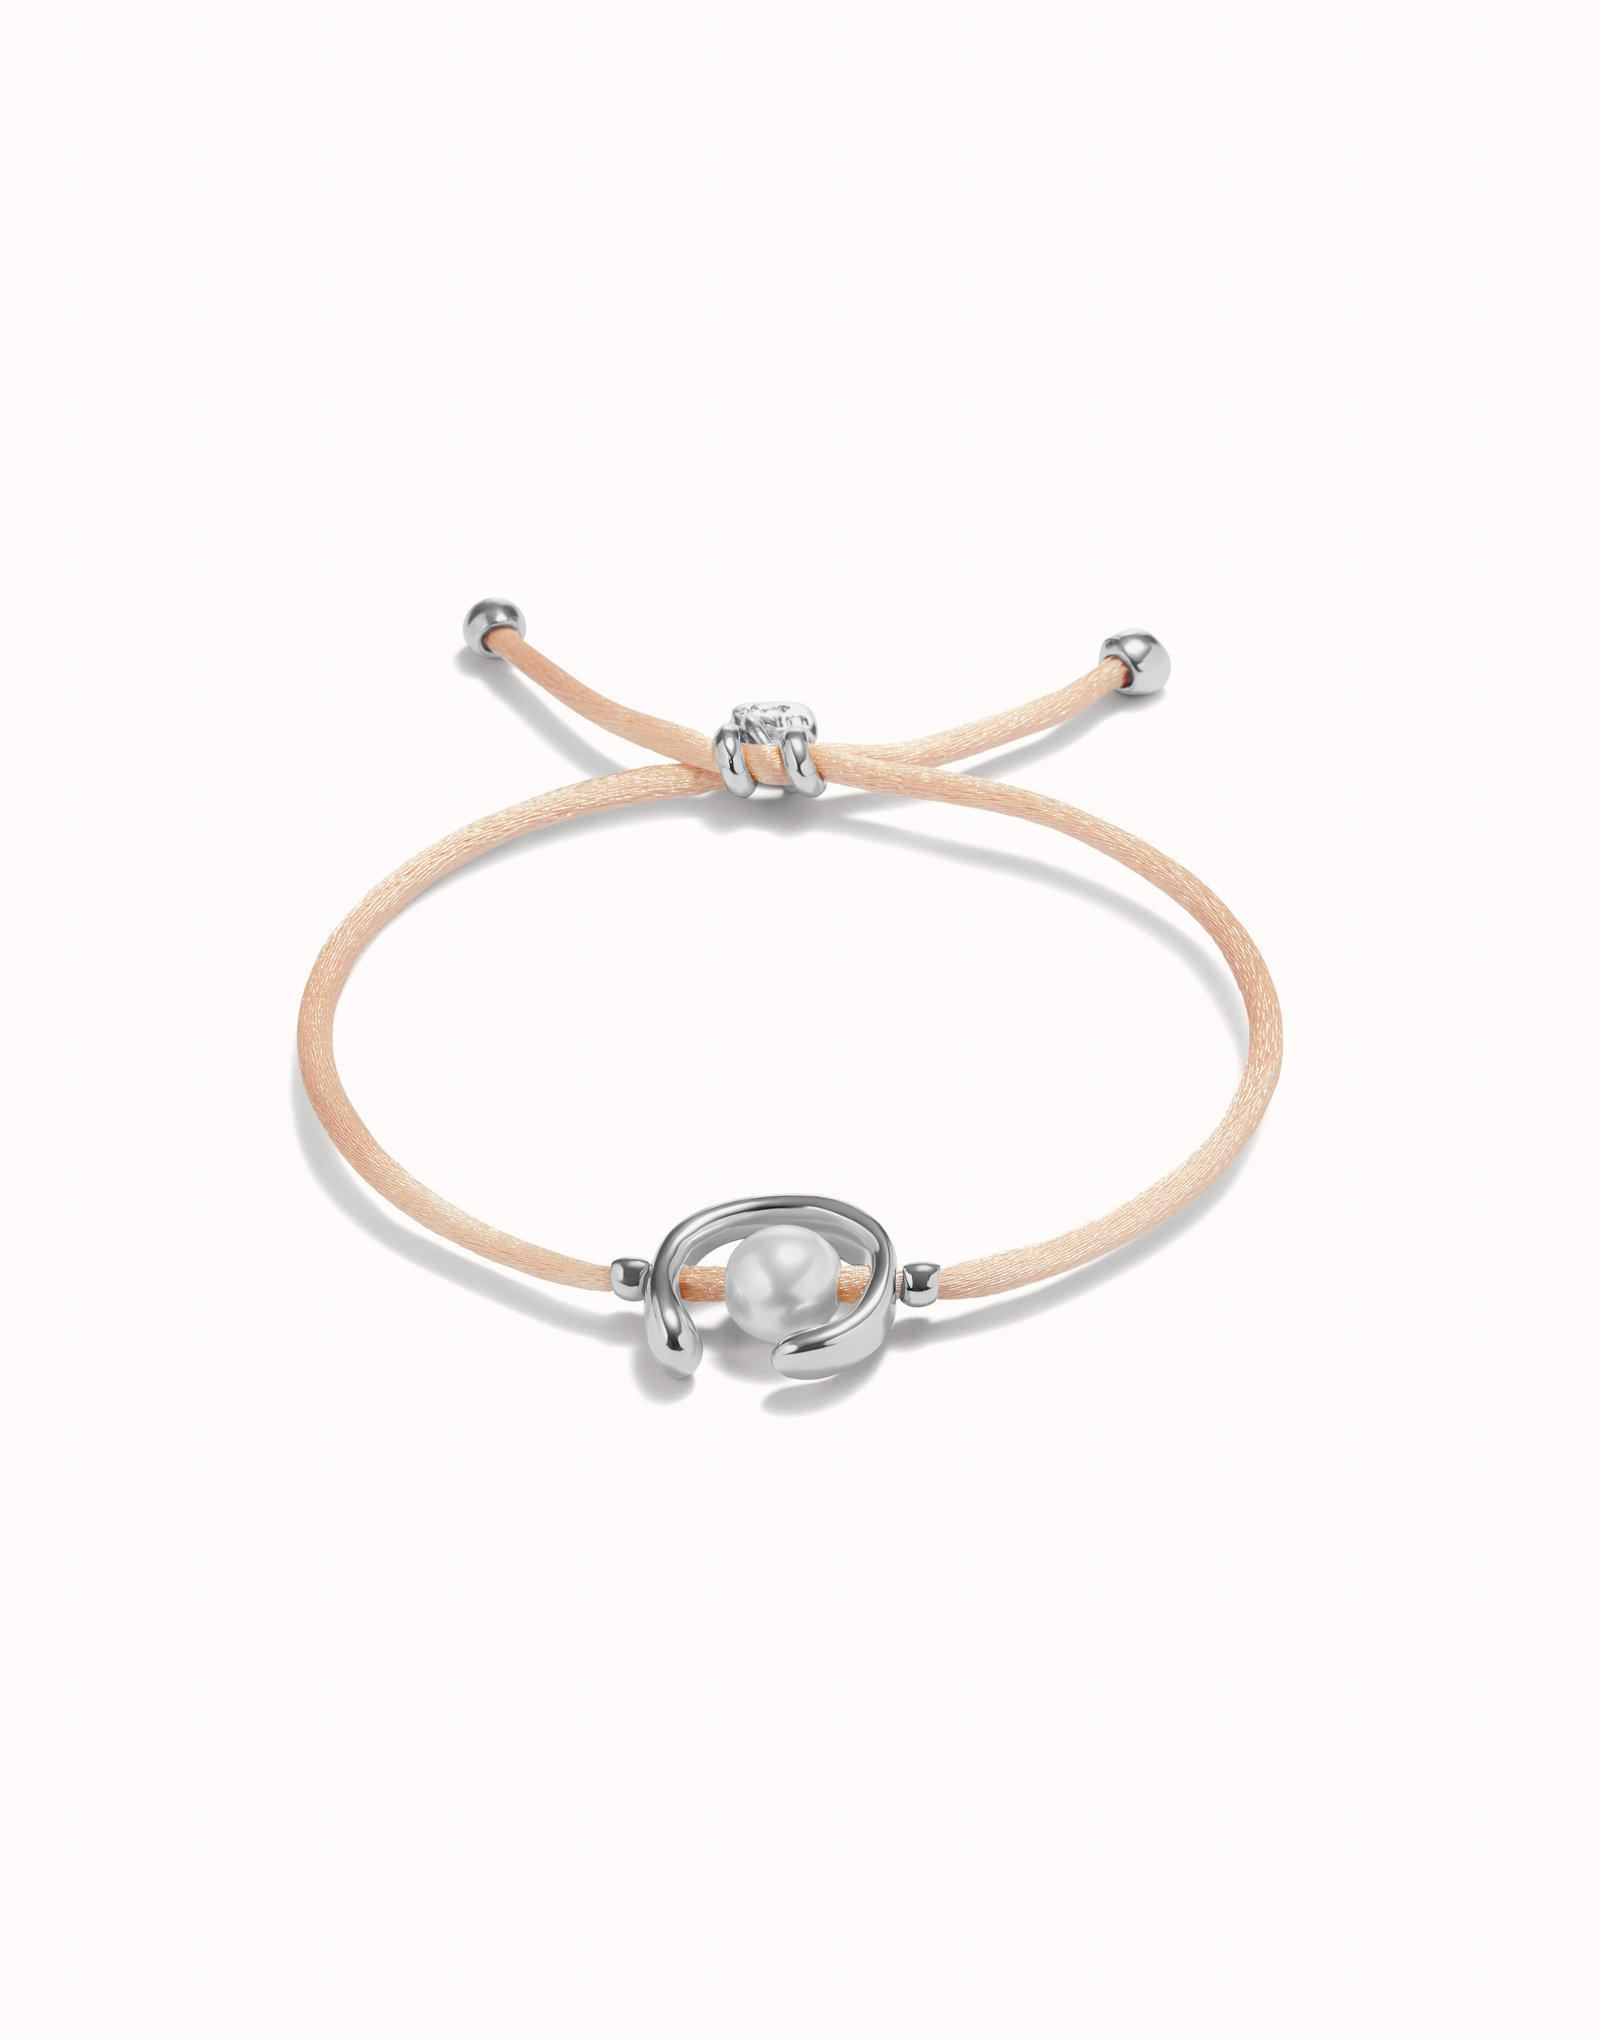 Bracciale in filo salmone con perla shell assortimento placcato argento Sterling., Argent, large image number null